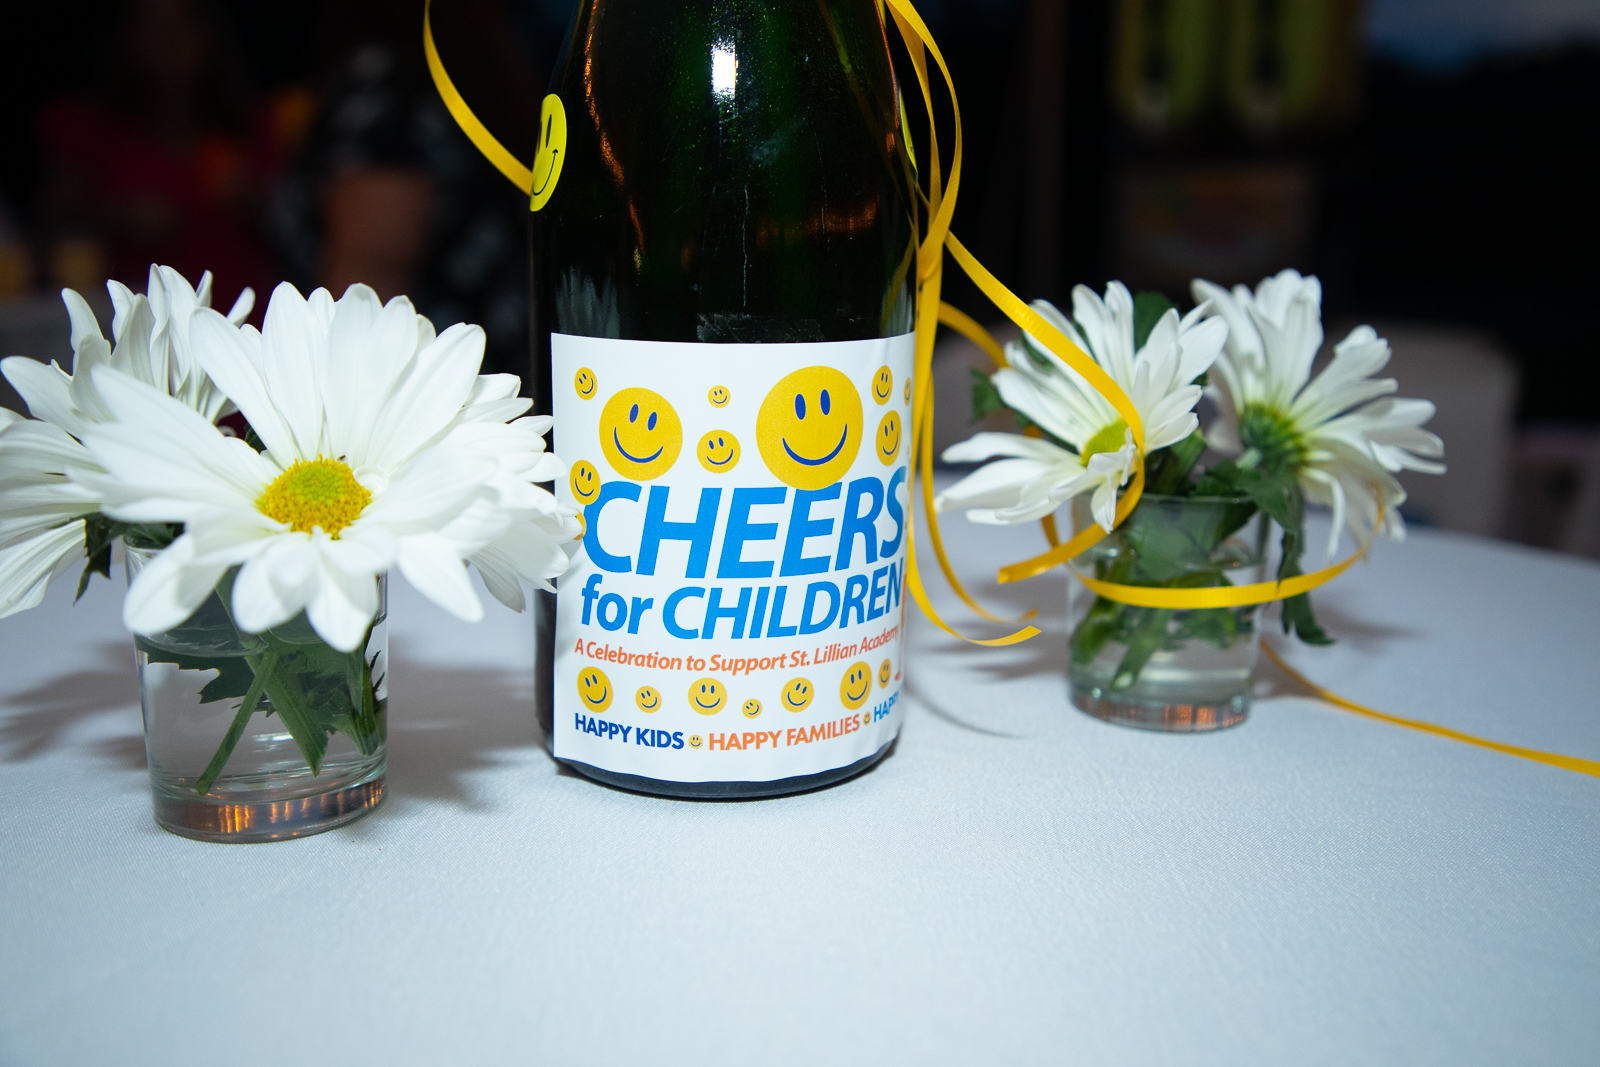 Cheers for Children Champagne bottle on table with flowers